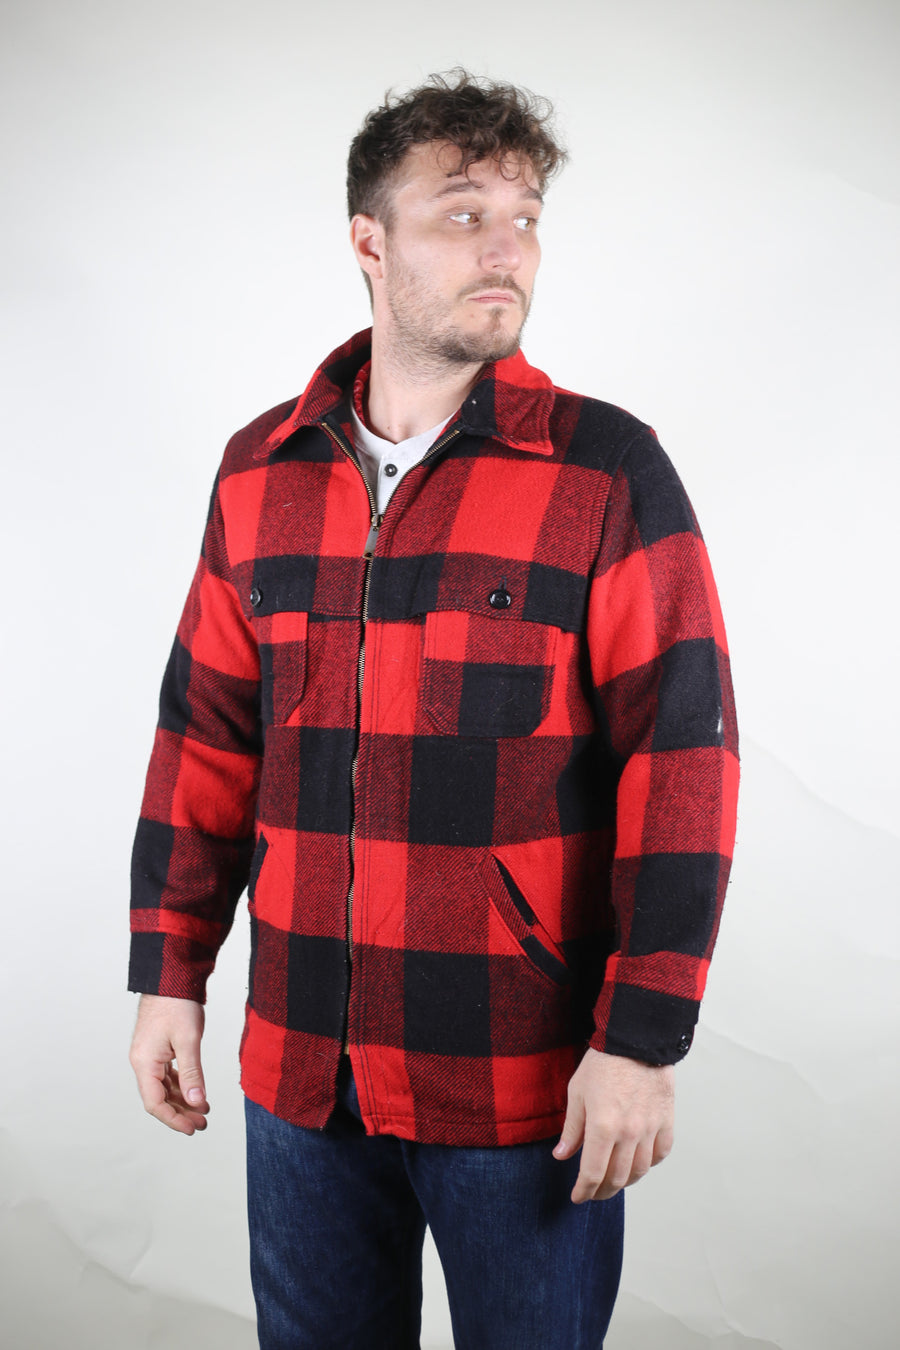 WOOLRICH MACKINAW made in usa - M -